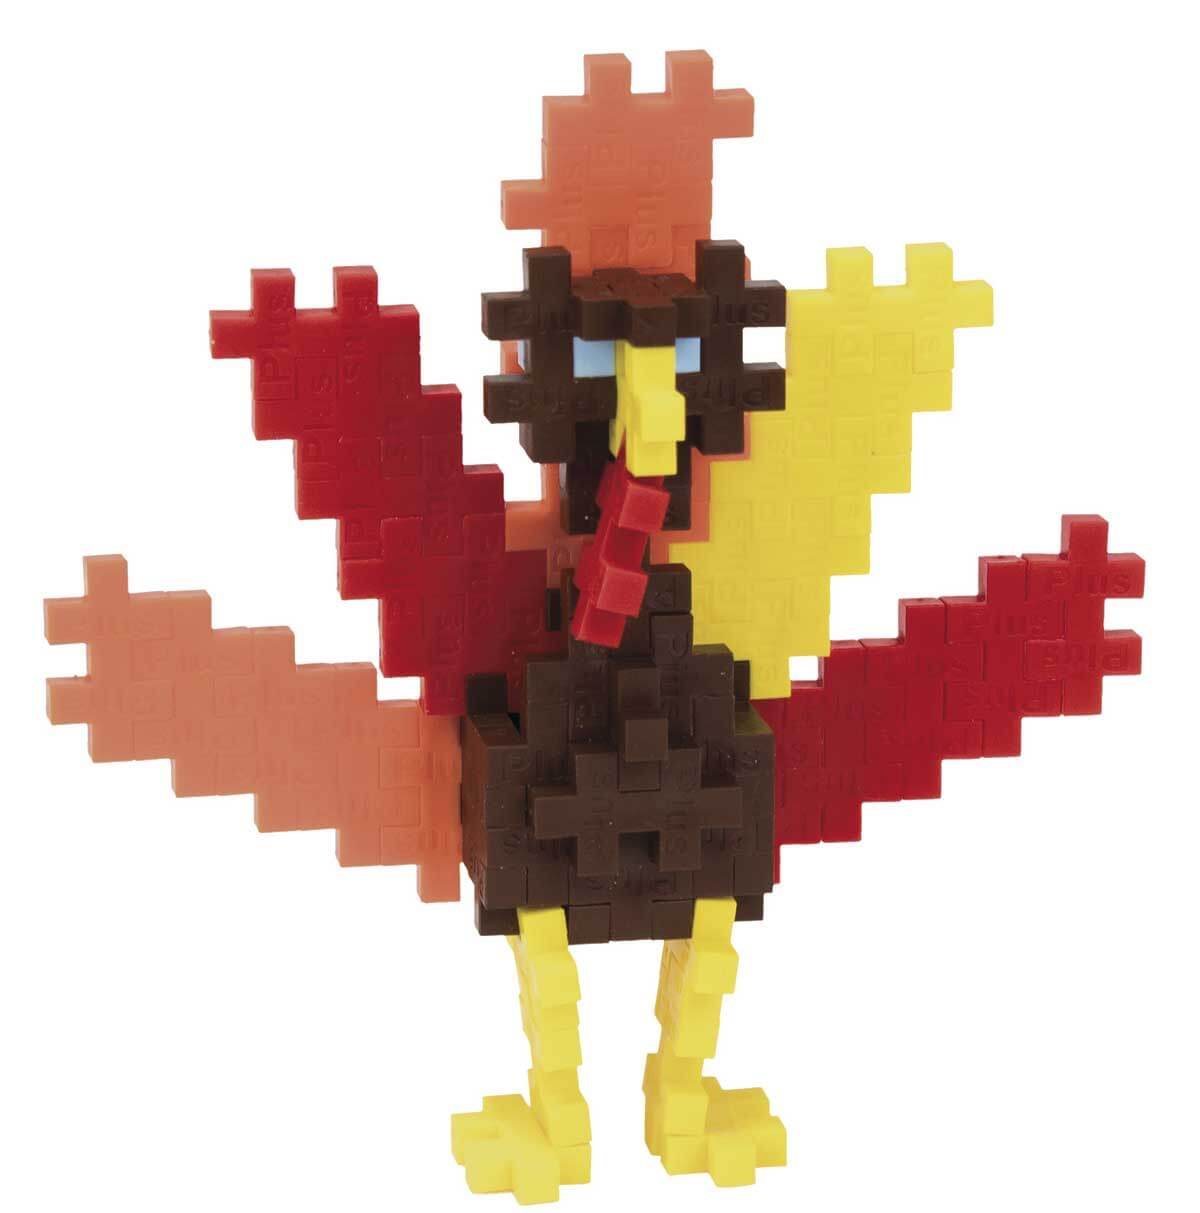 Thankful for this 3-D puzzle: Plus-Plus’ turkey is a fun pastime